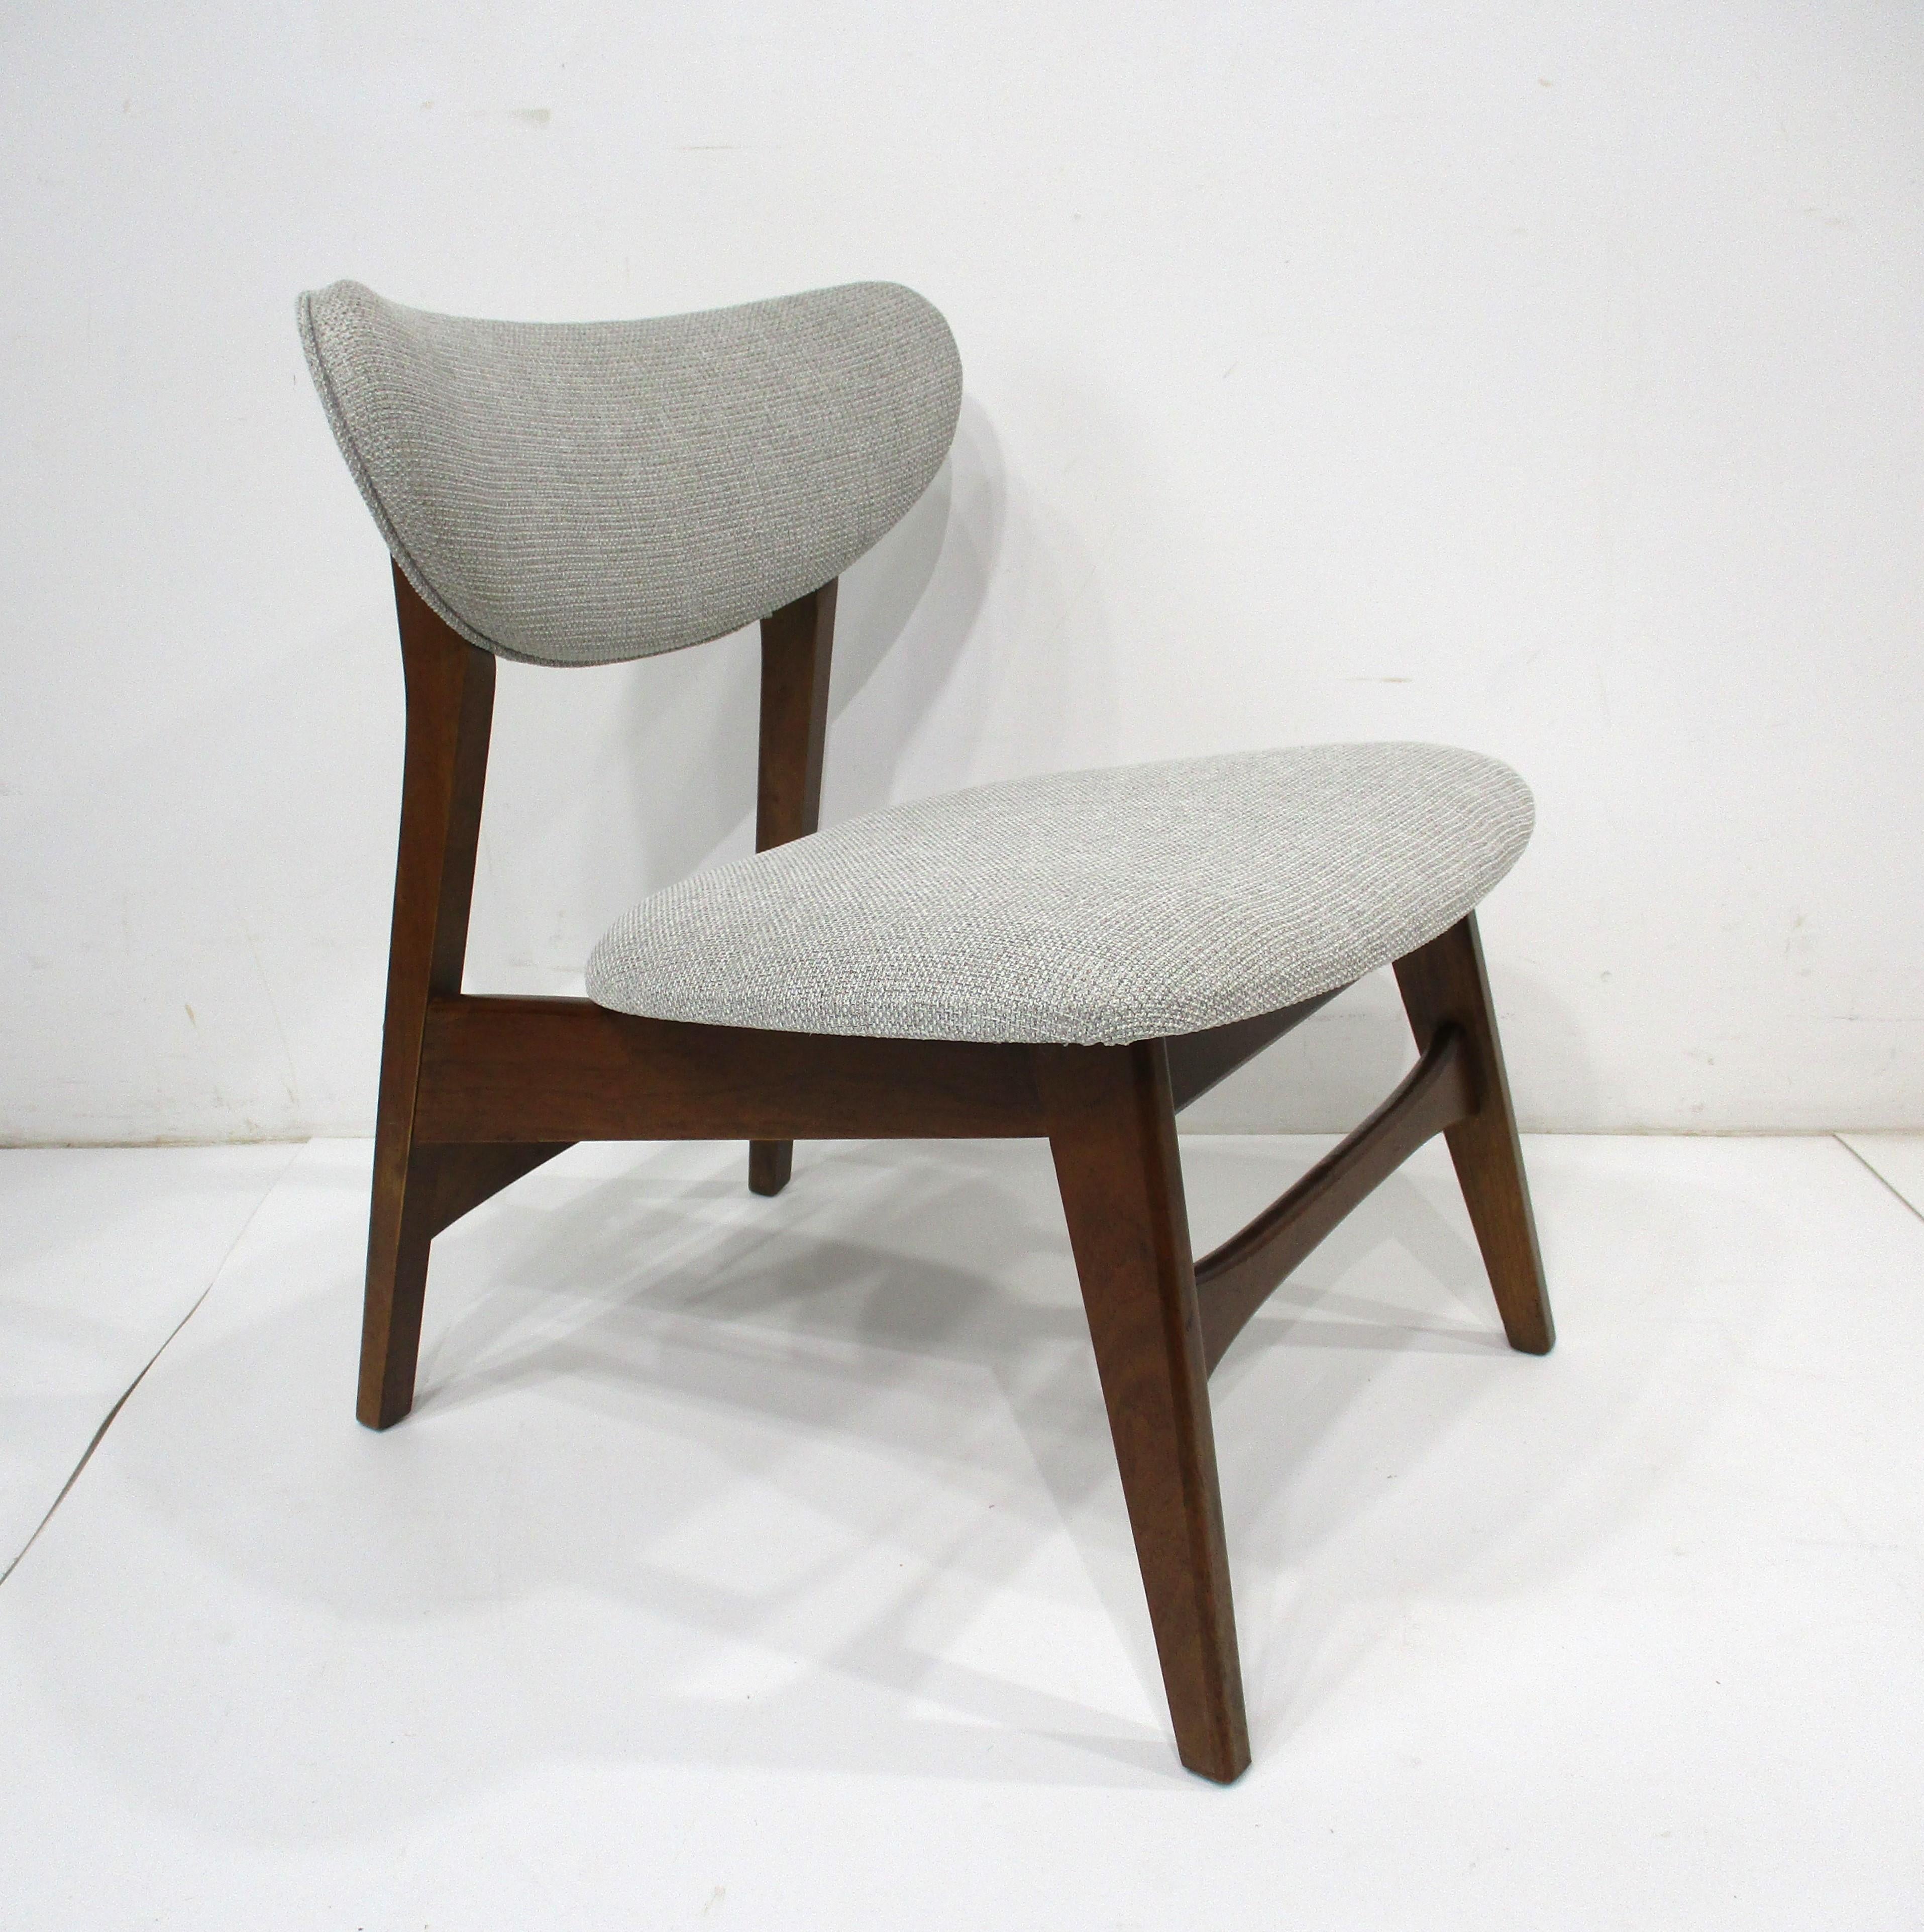 American Mid Century Upholstered Lounge Chairs in the style of Peter Hvidt   For Sale